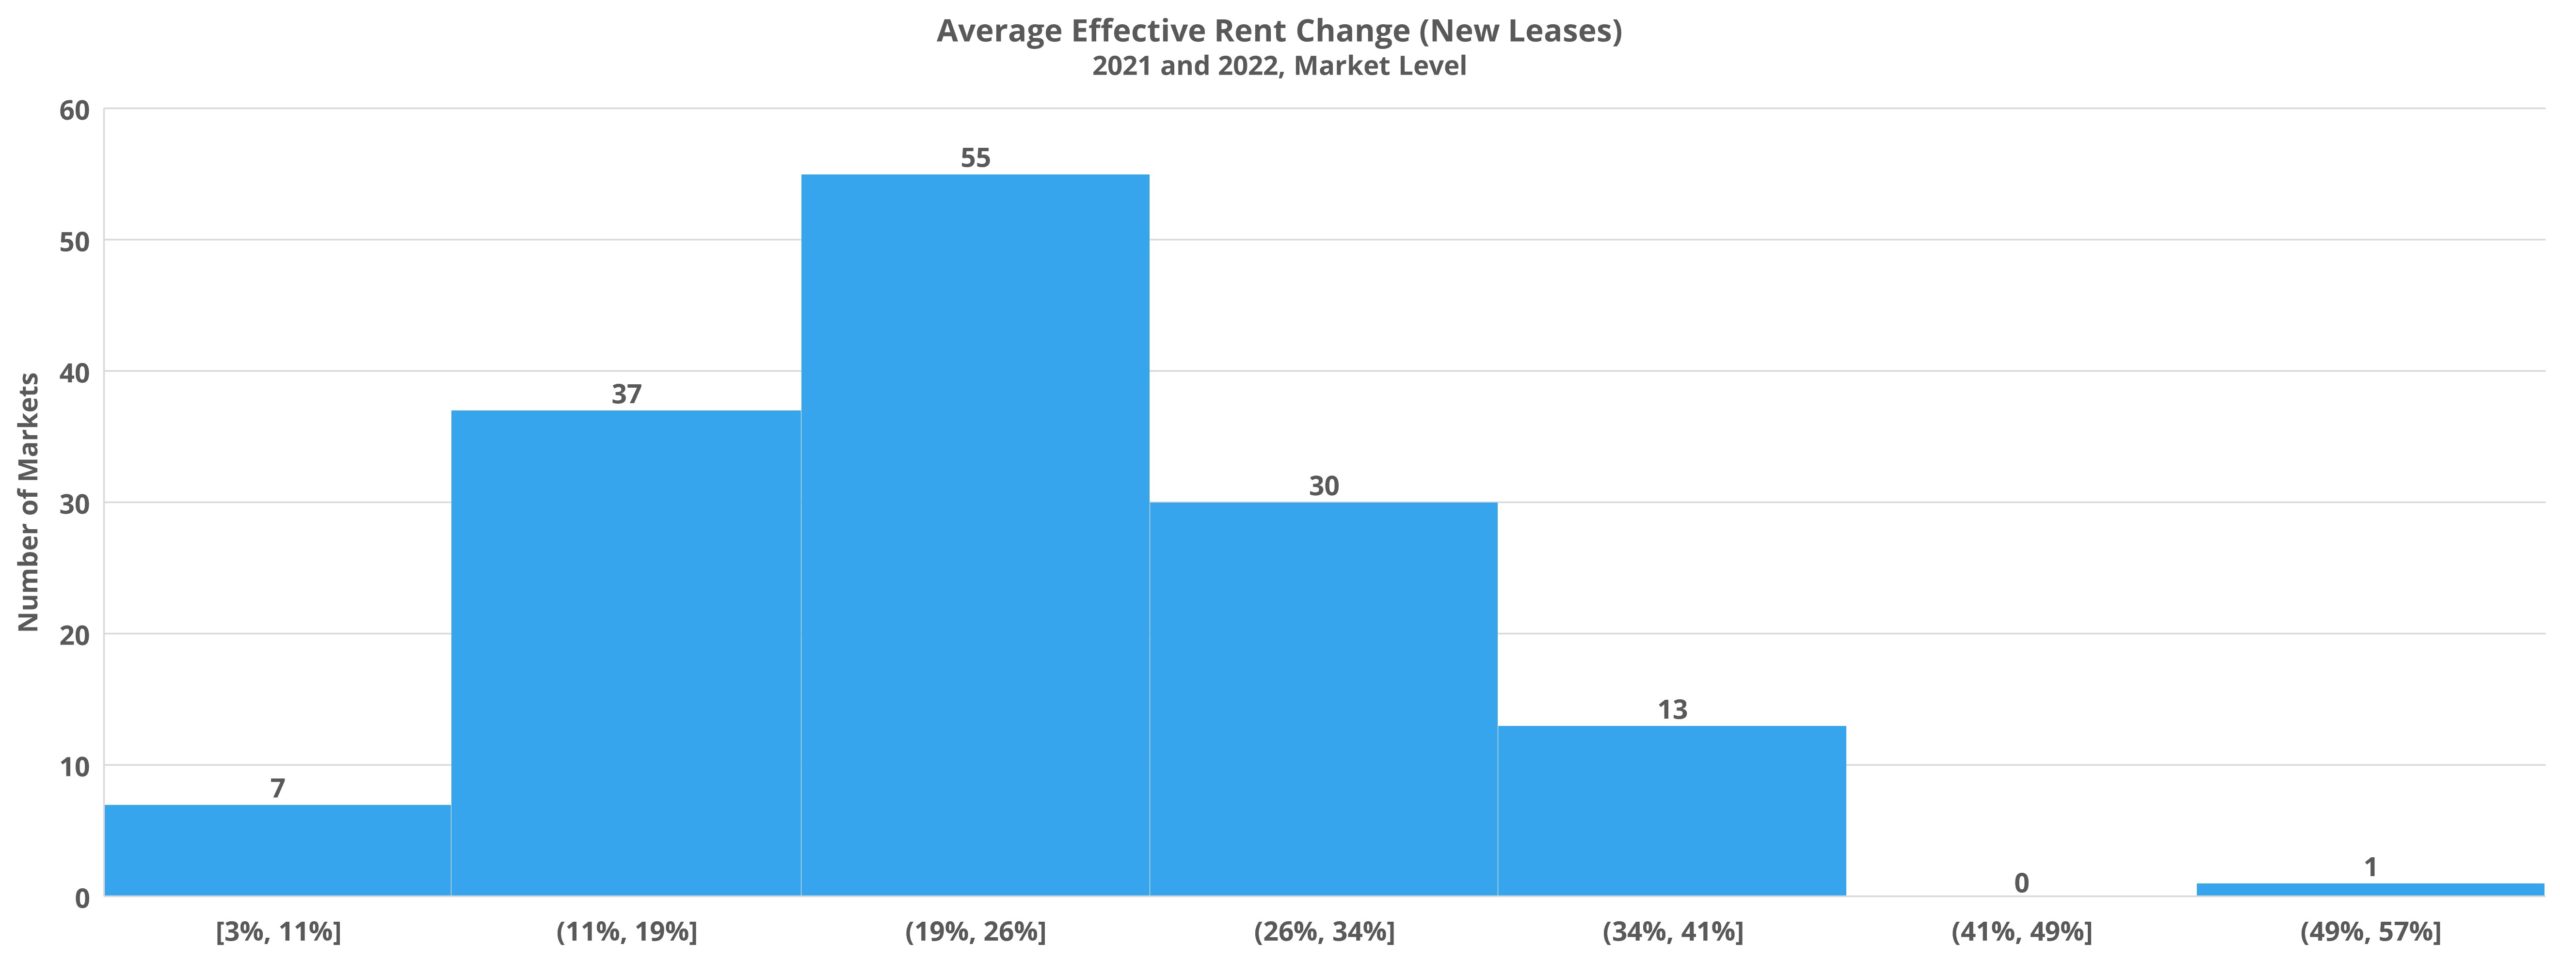 Average Effective Rent Change (New Leases)